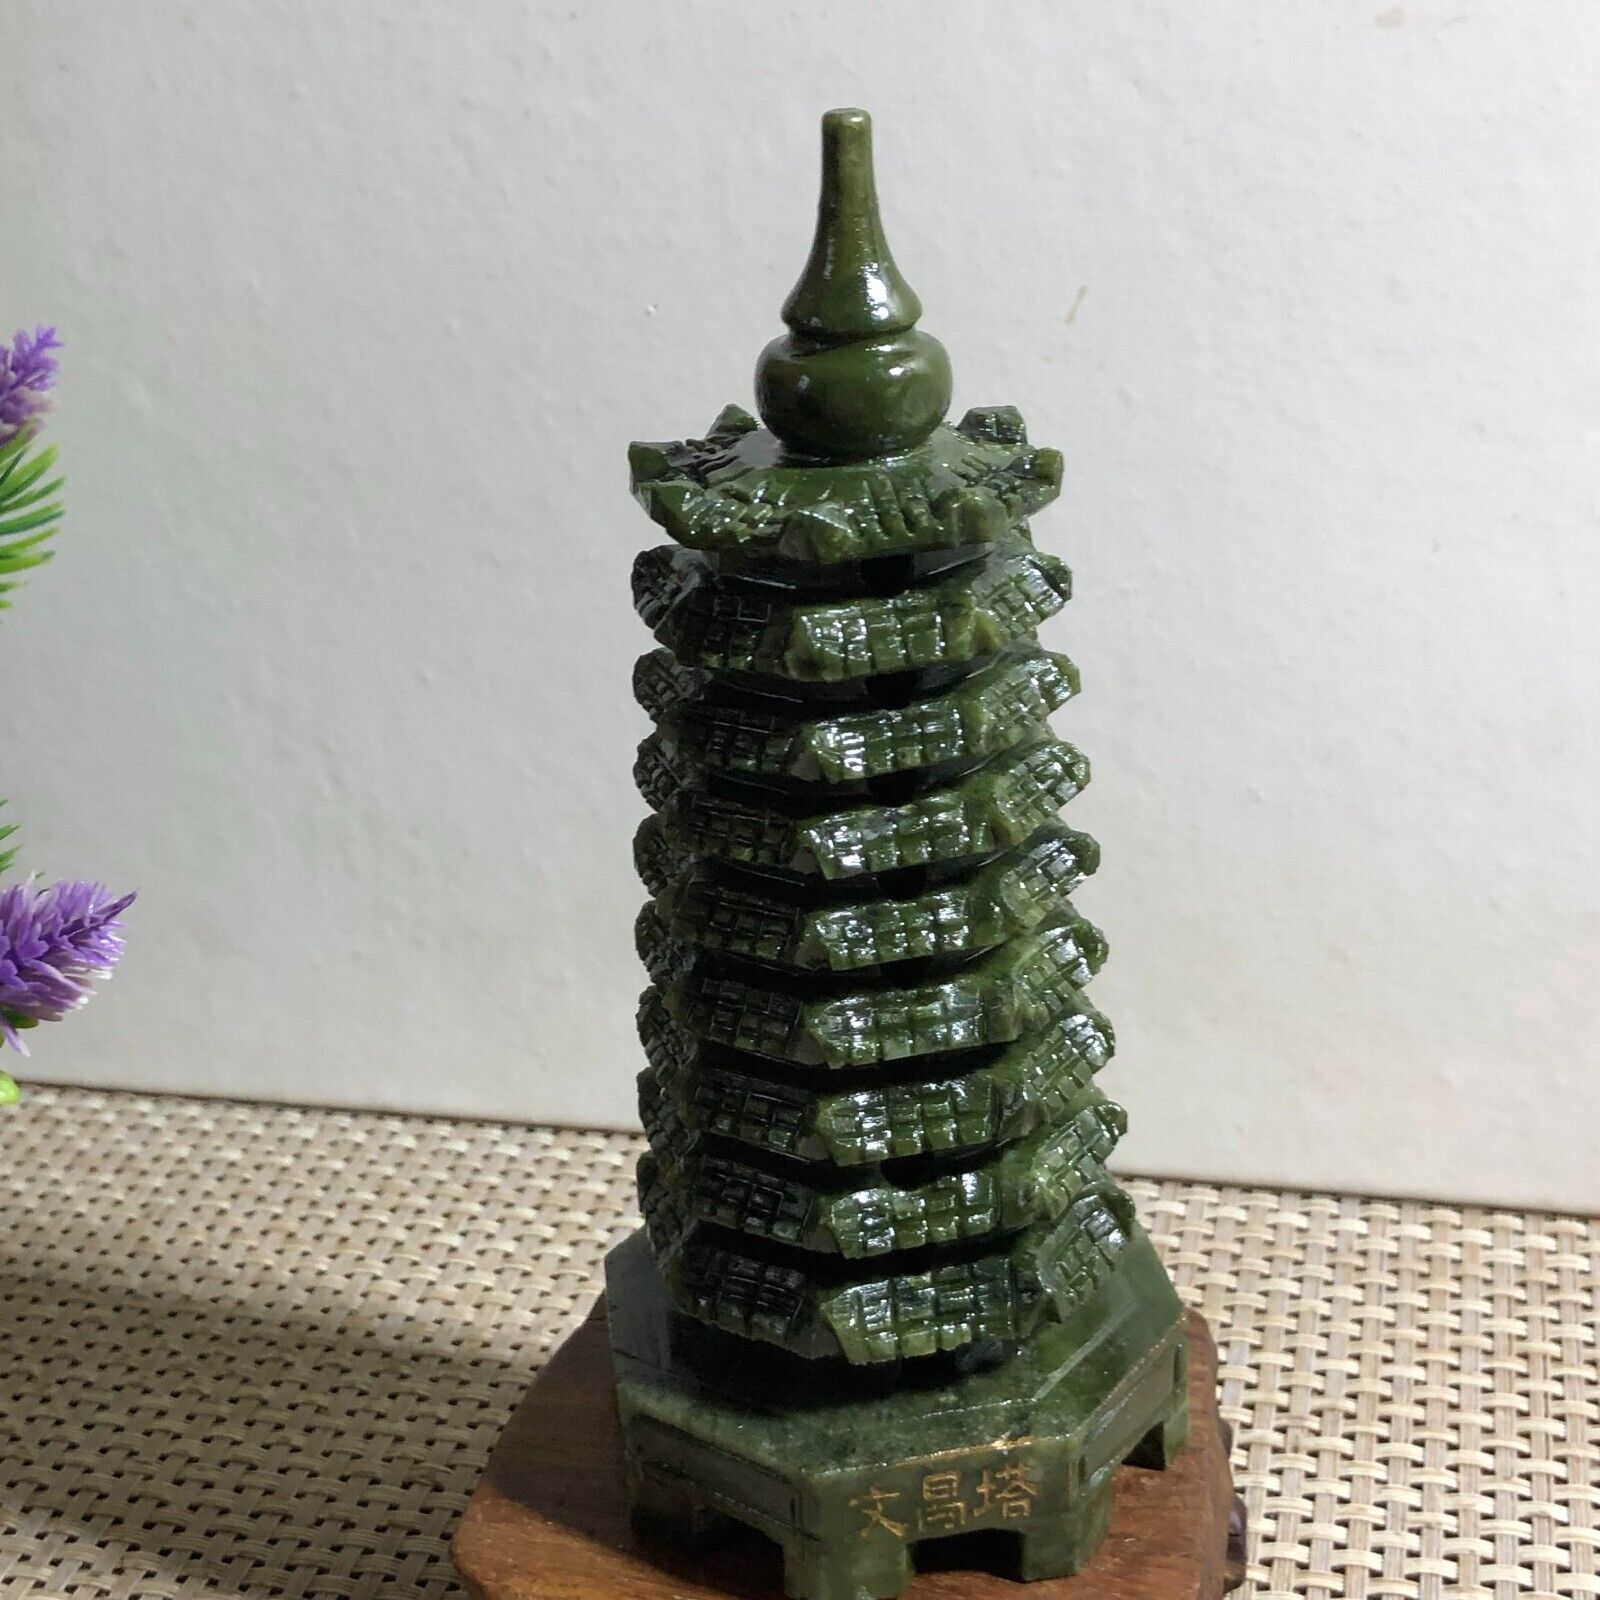 Wenchang pagoda Jade Feng shui  good luck for kids in study research 409g d32